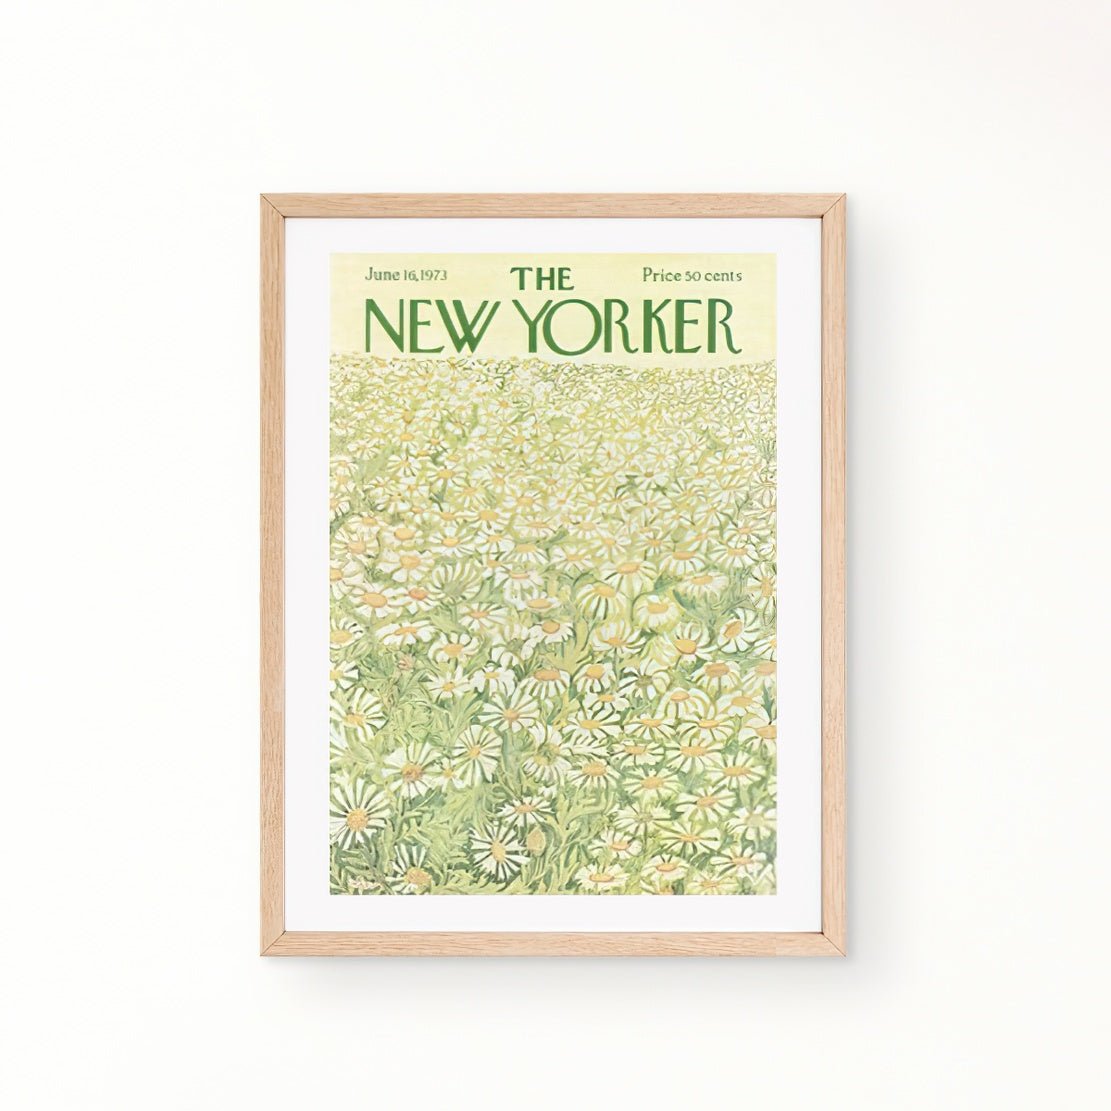 The New Yorker vintage cover poster green daisy flower field